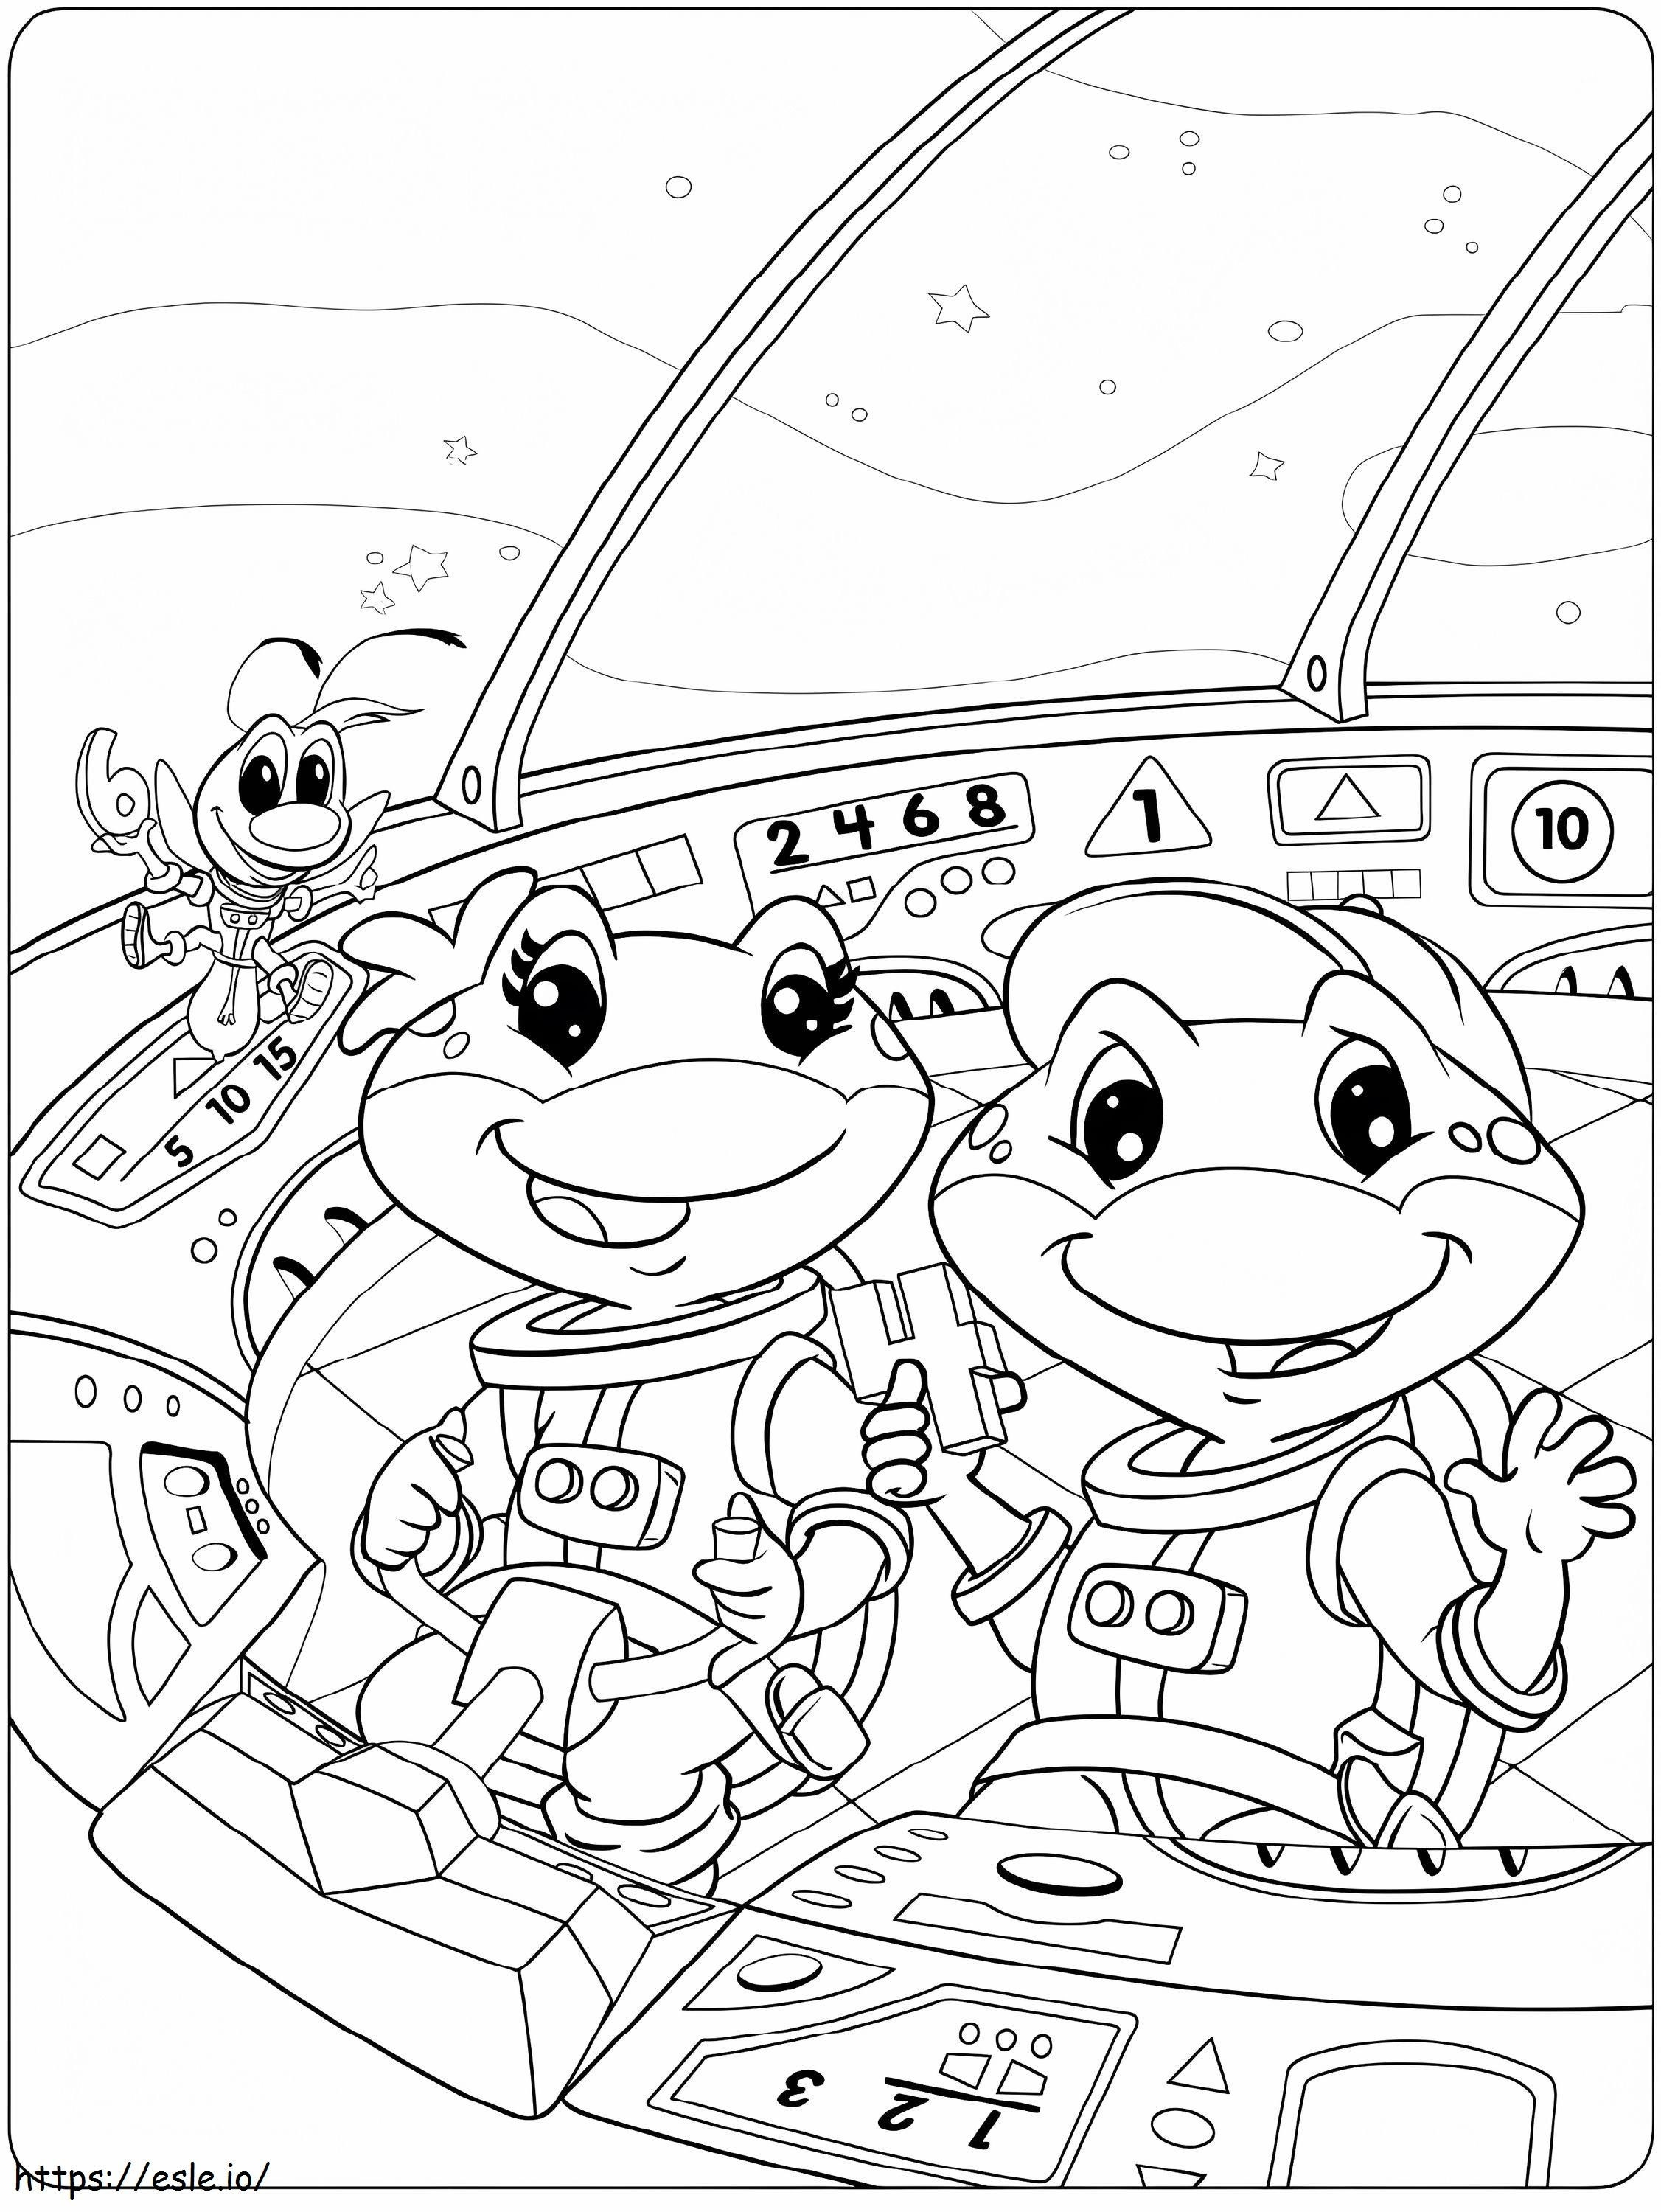 Leapfrog 2 coloring page